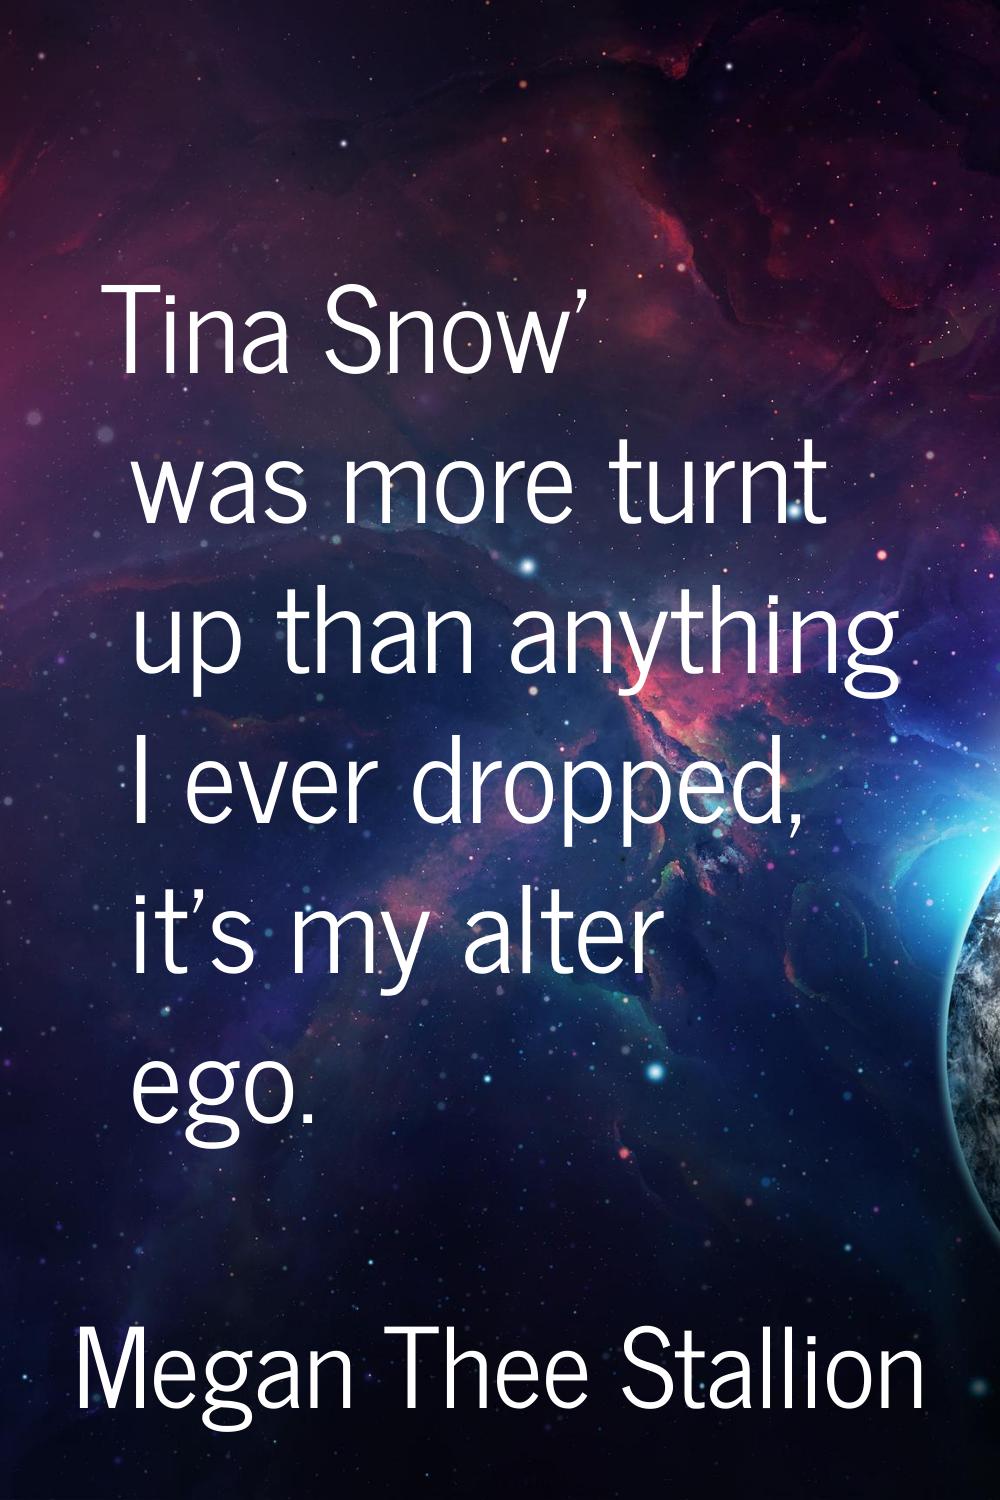 Tina Snow' was more turnt up than anything I ever dropped, it's my alter ego.